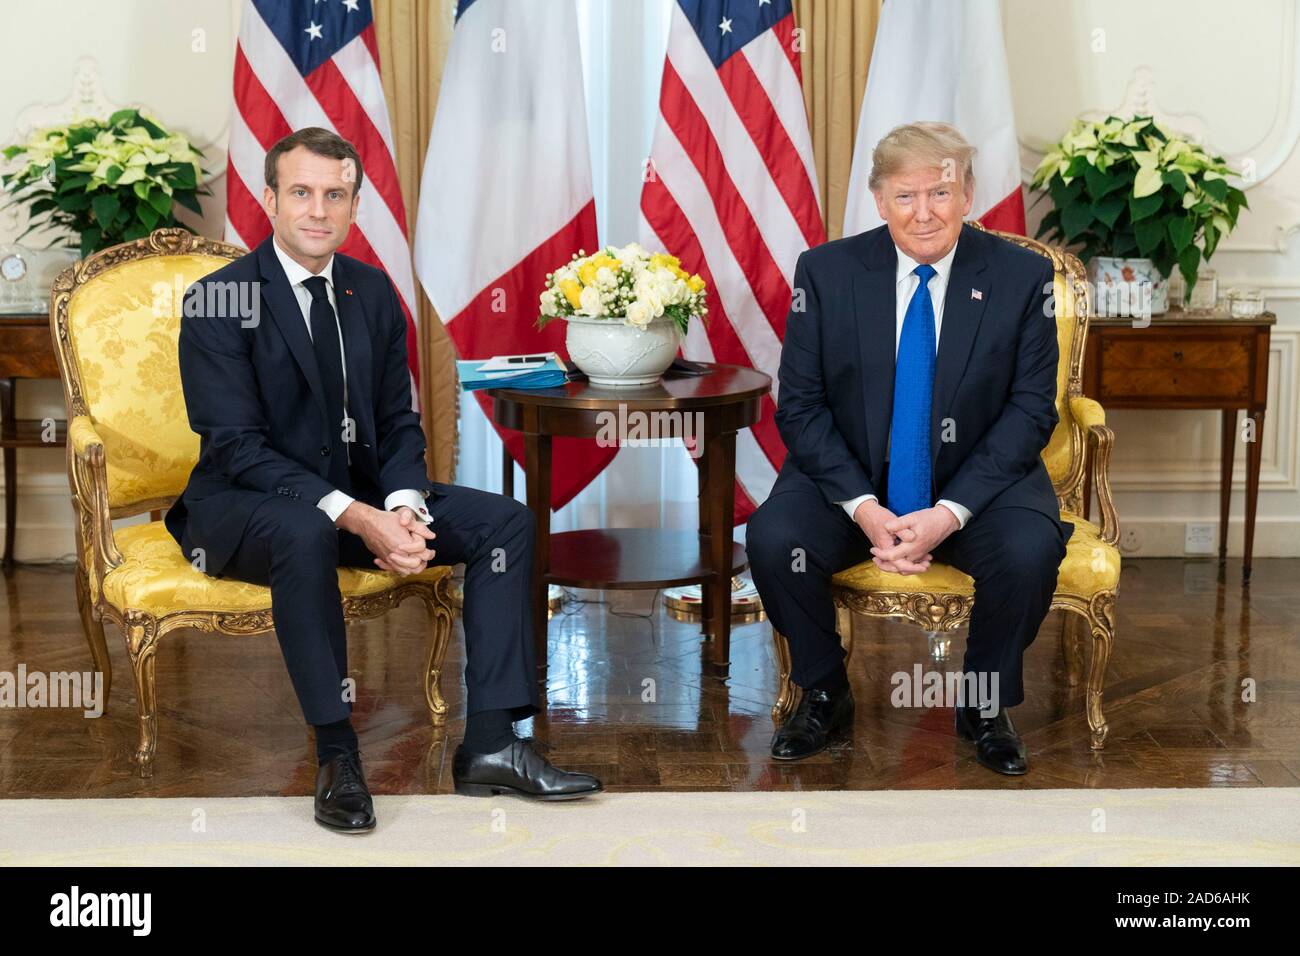 London, UK. 03 December, 2019. U.S. President Donald Trump and French President Emmanuel Macron pose for photographers prior to the start of their bilateral meeting before the NATO Summit at Winfield House December 3, 2019 in London, UK.   Credit: Shealah Craighead/Planetpix/Alamy Live News Stock Photo